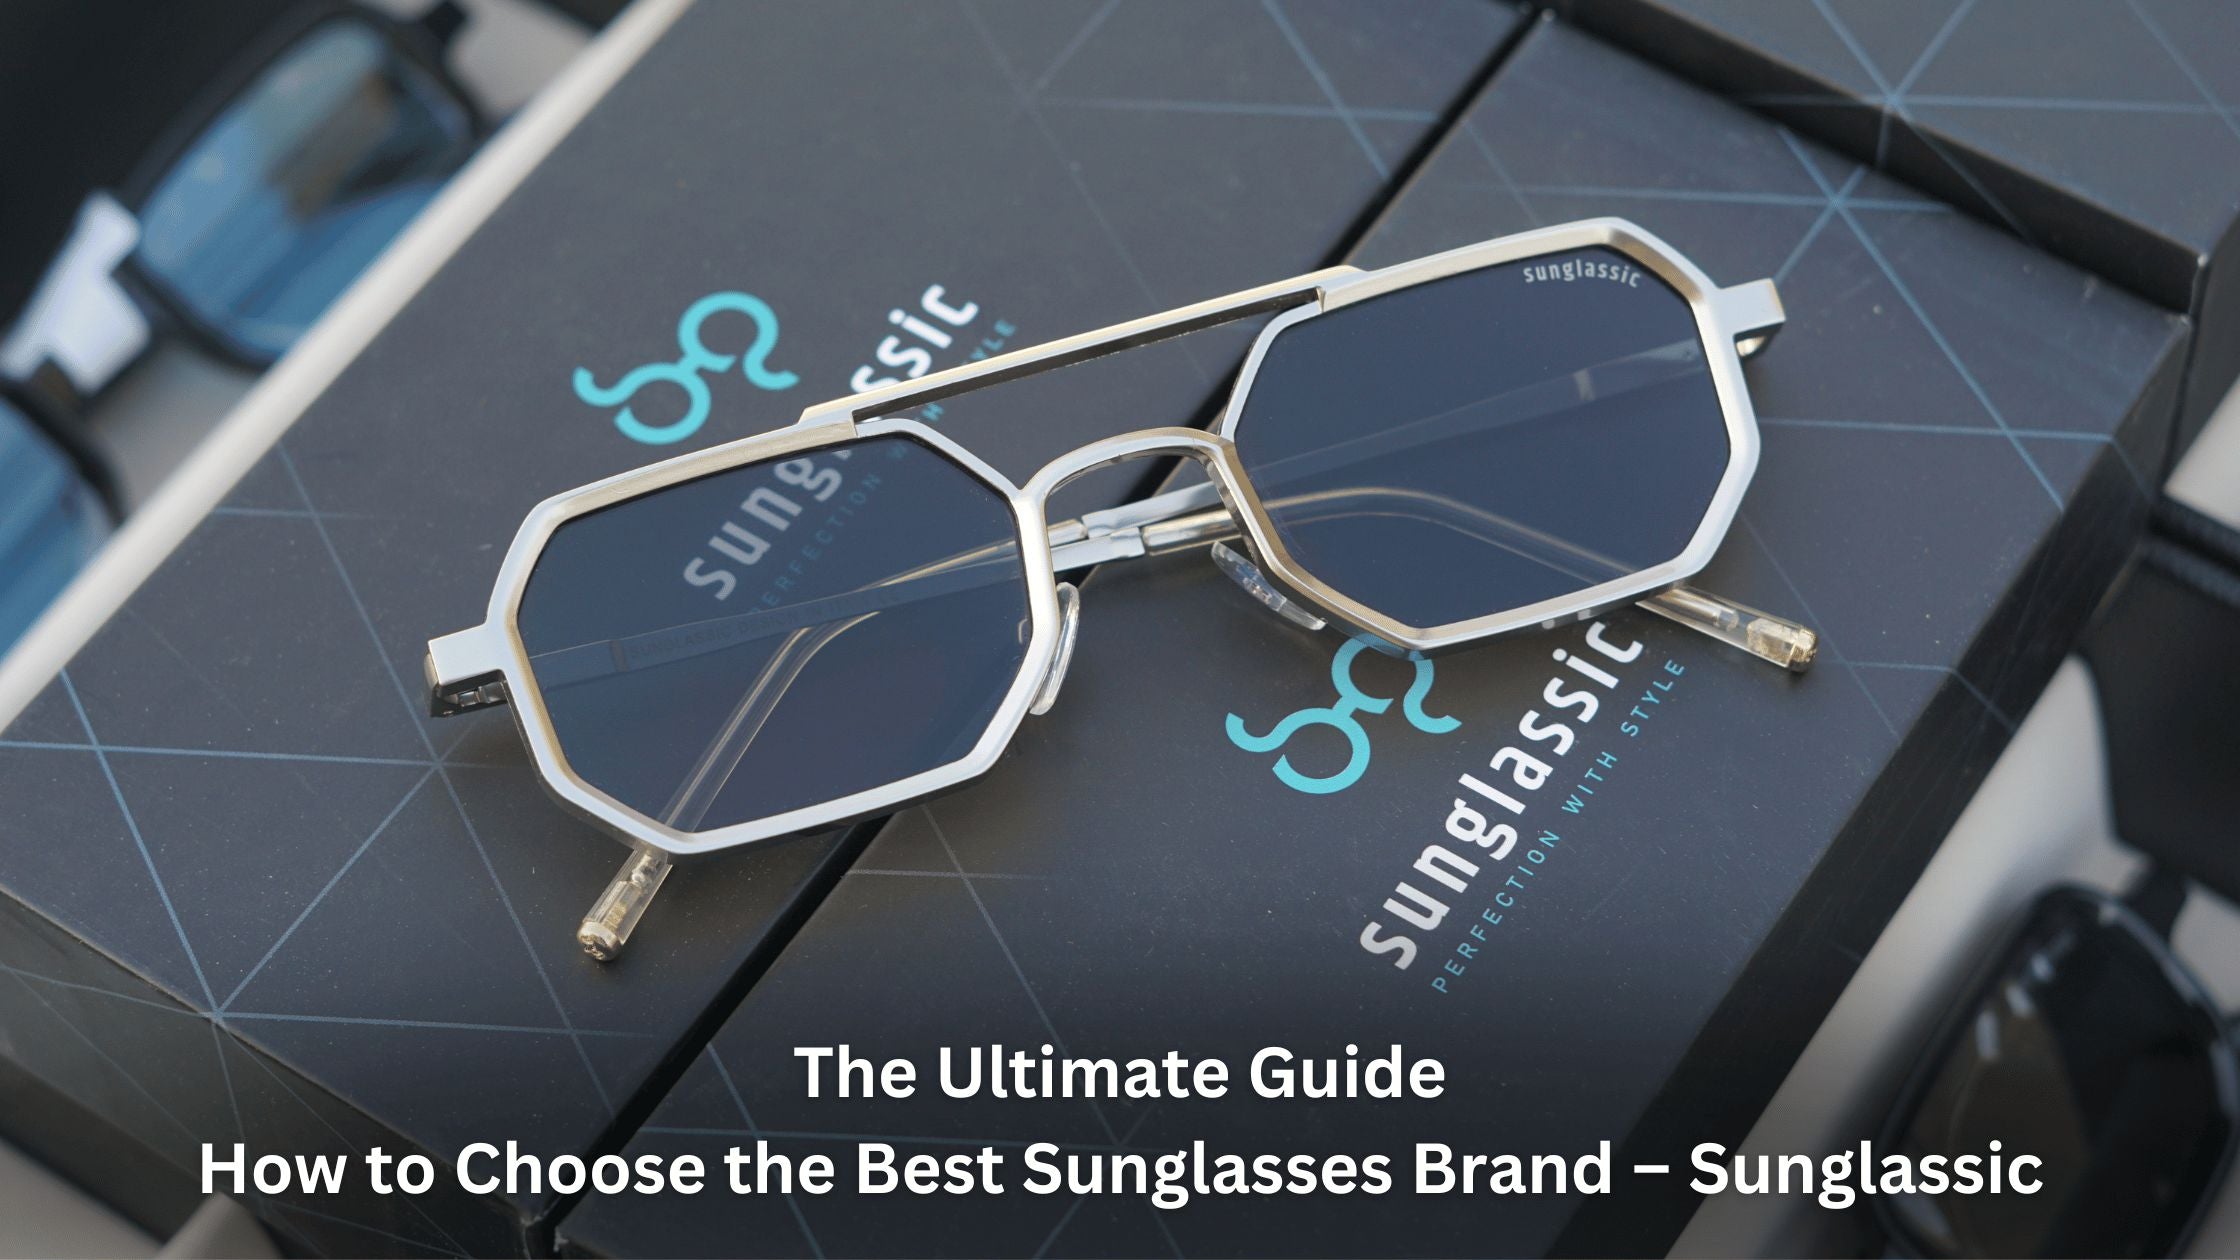 The Ultimate Guide: How to Choose the Best Sunglasses Brand – Sunglassic